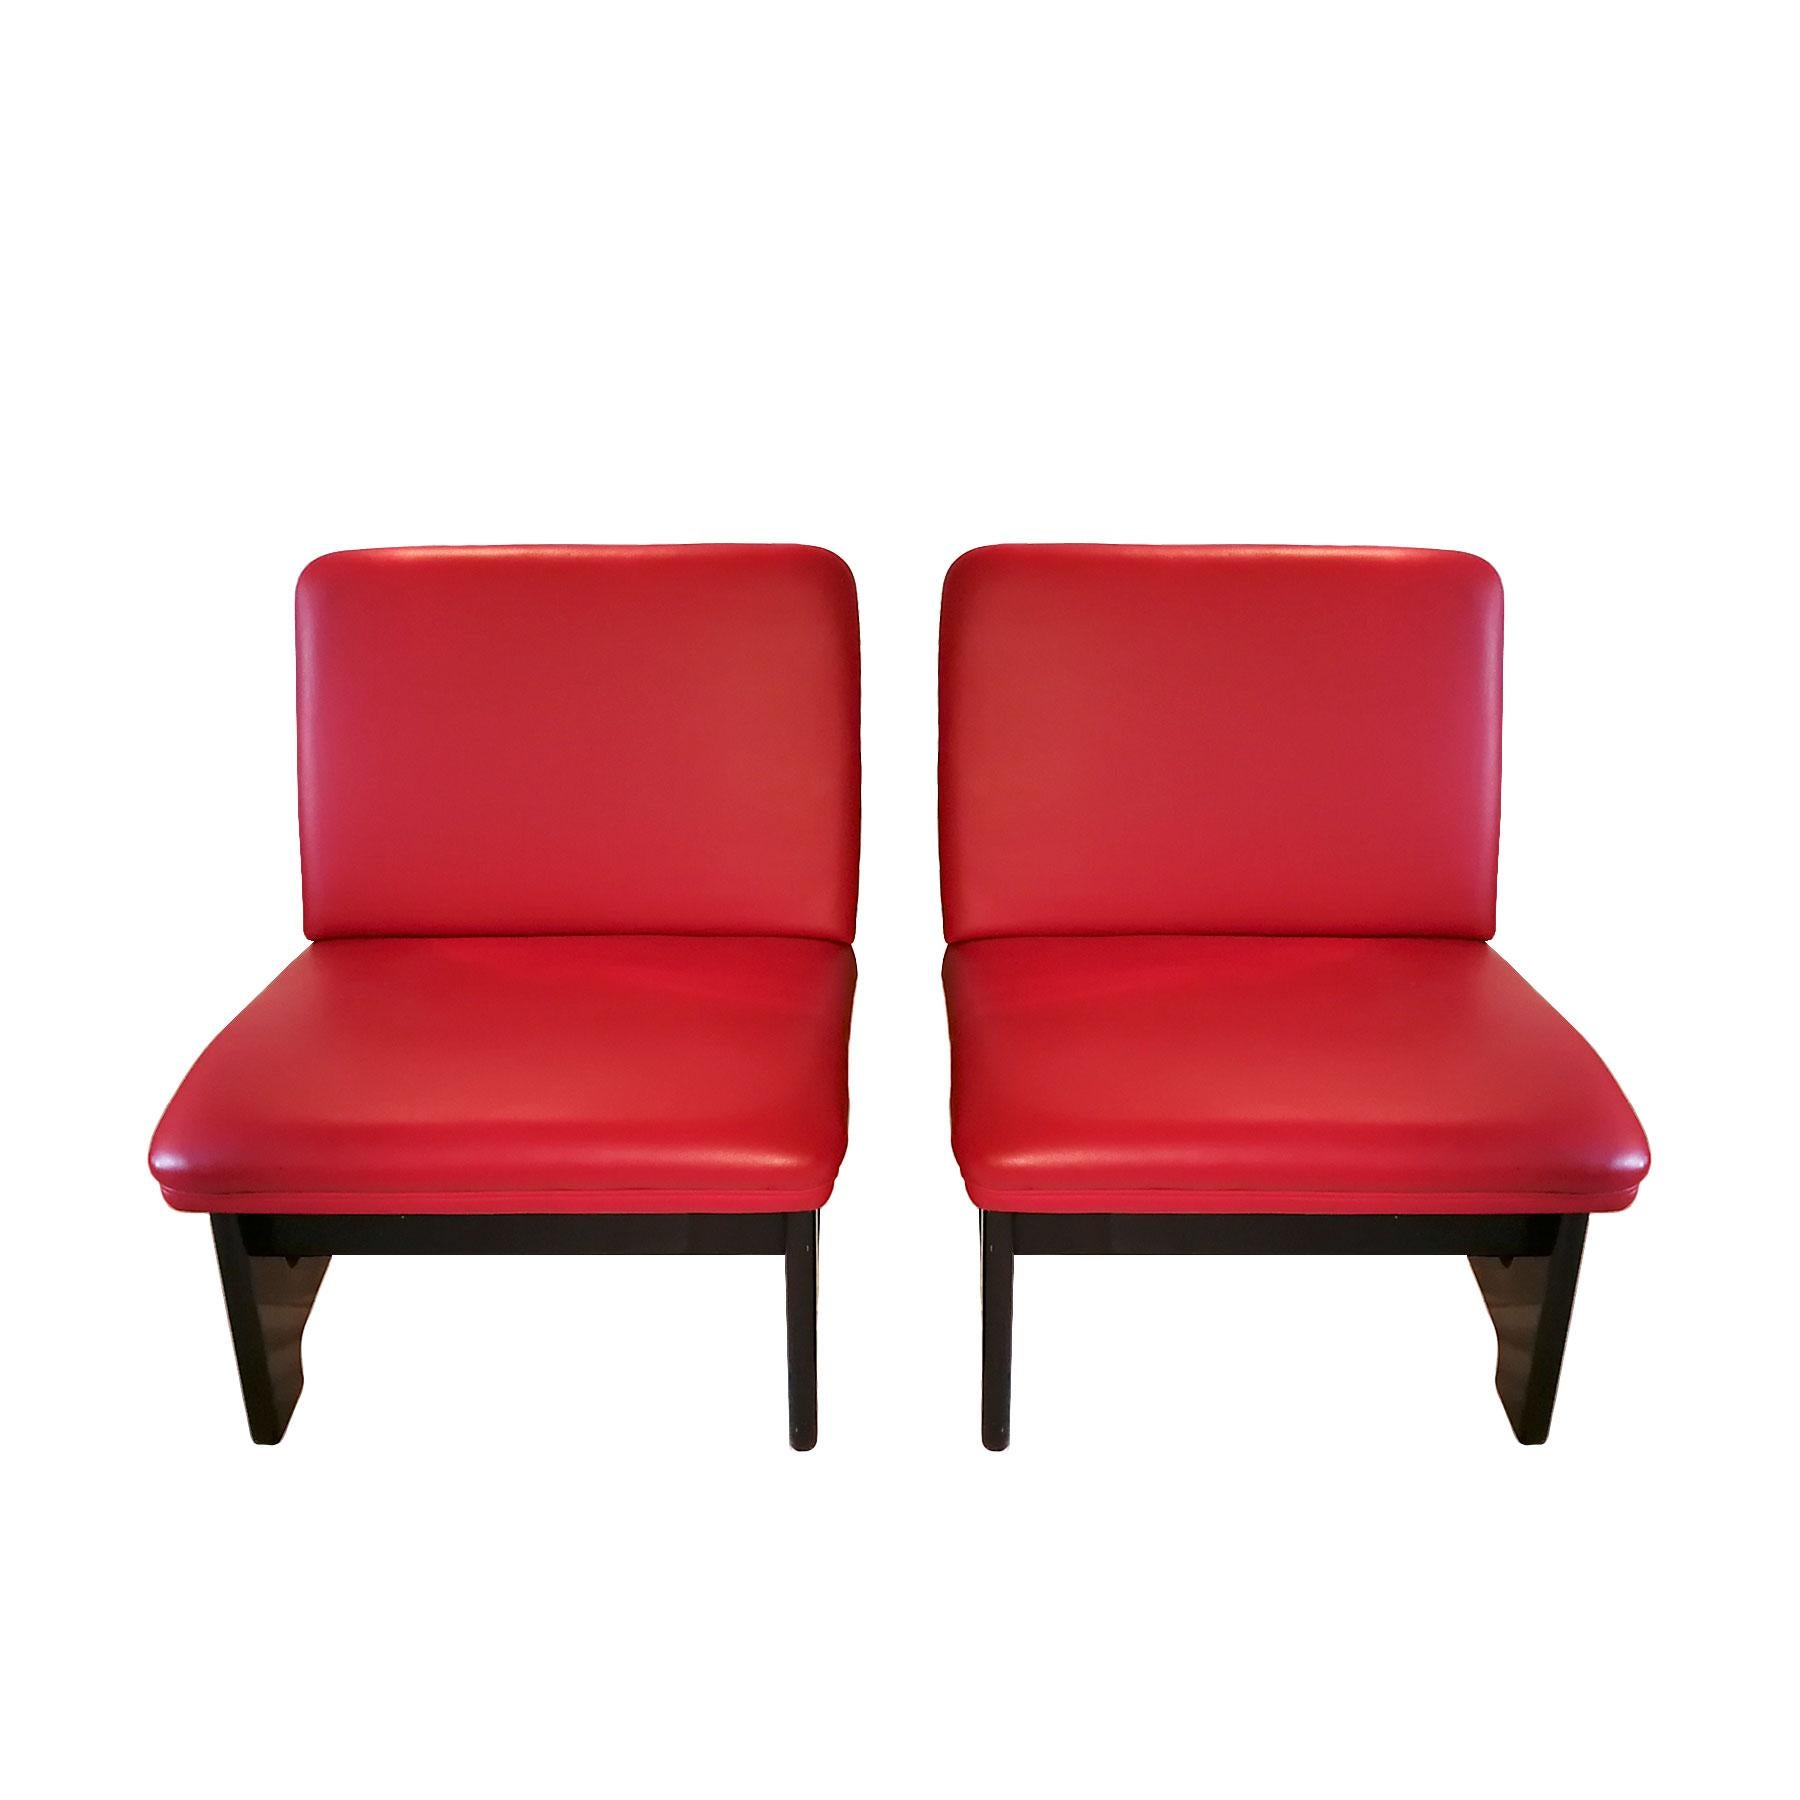 Late 20th Century 1970s Pair of Small Armchairs, Wood, Red Leather, Spain - Barcelona For Sale